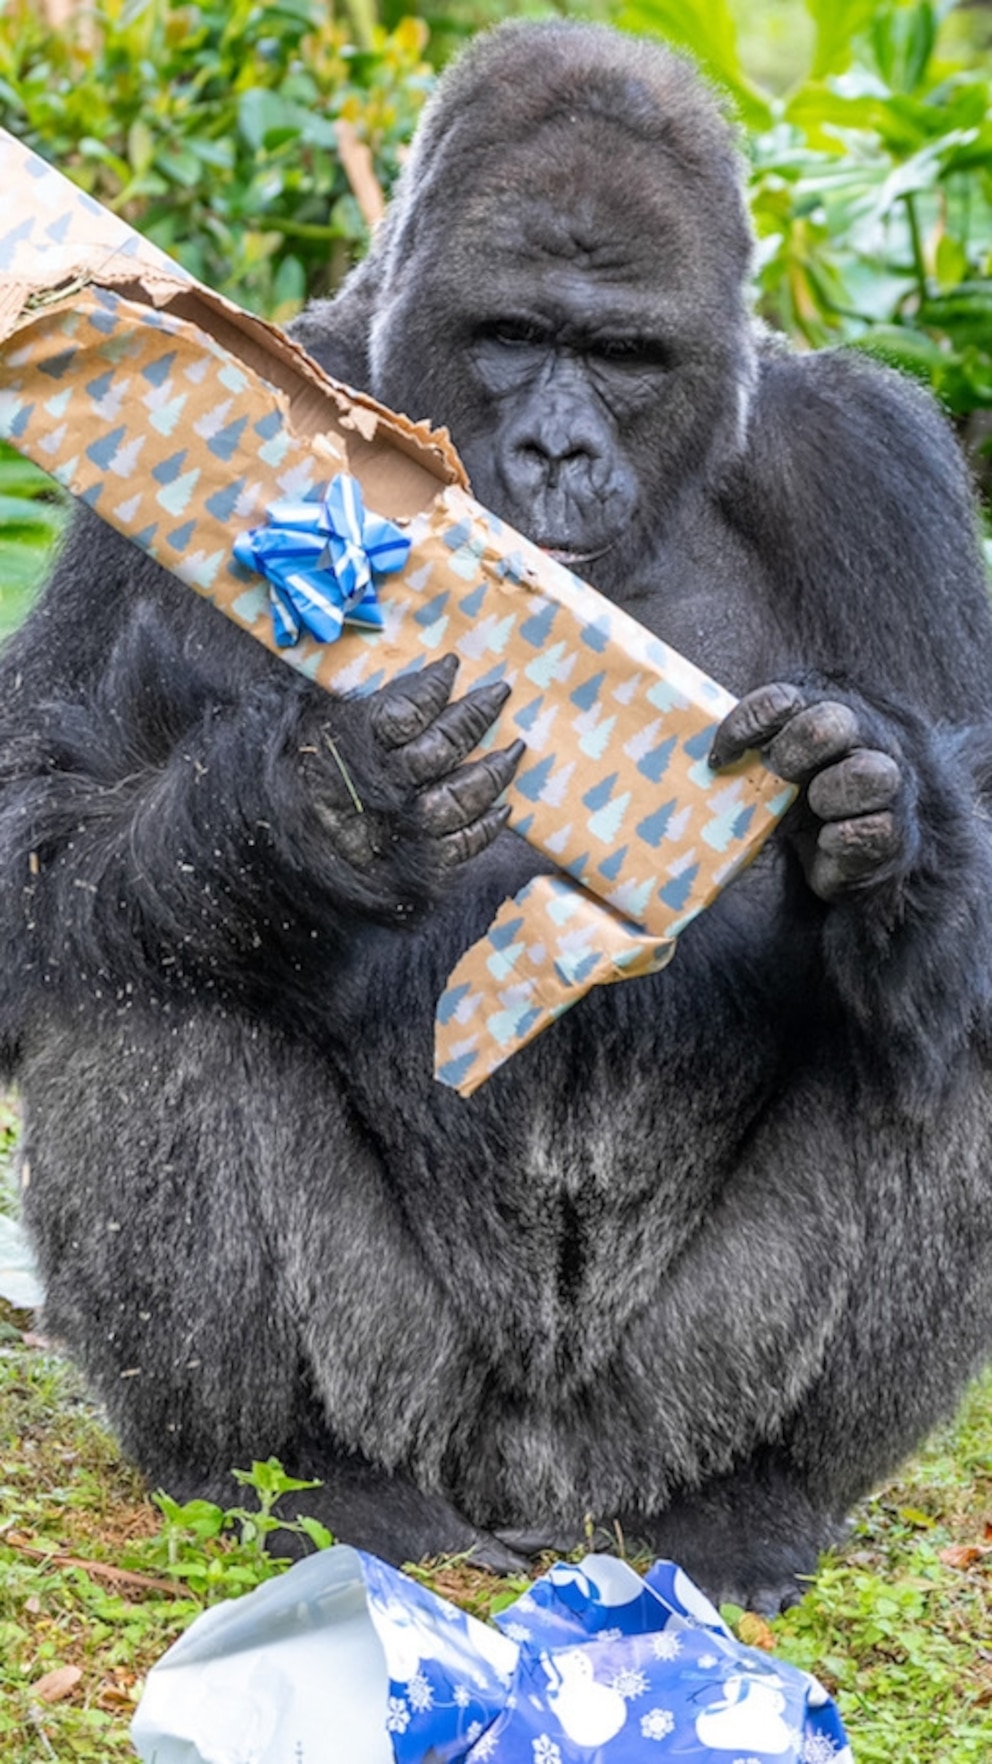 Disney's Animal Kingdom features video gorillas opening festive gifts for the holidays